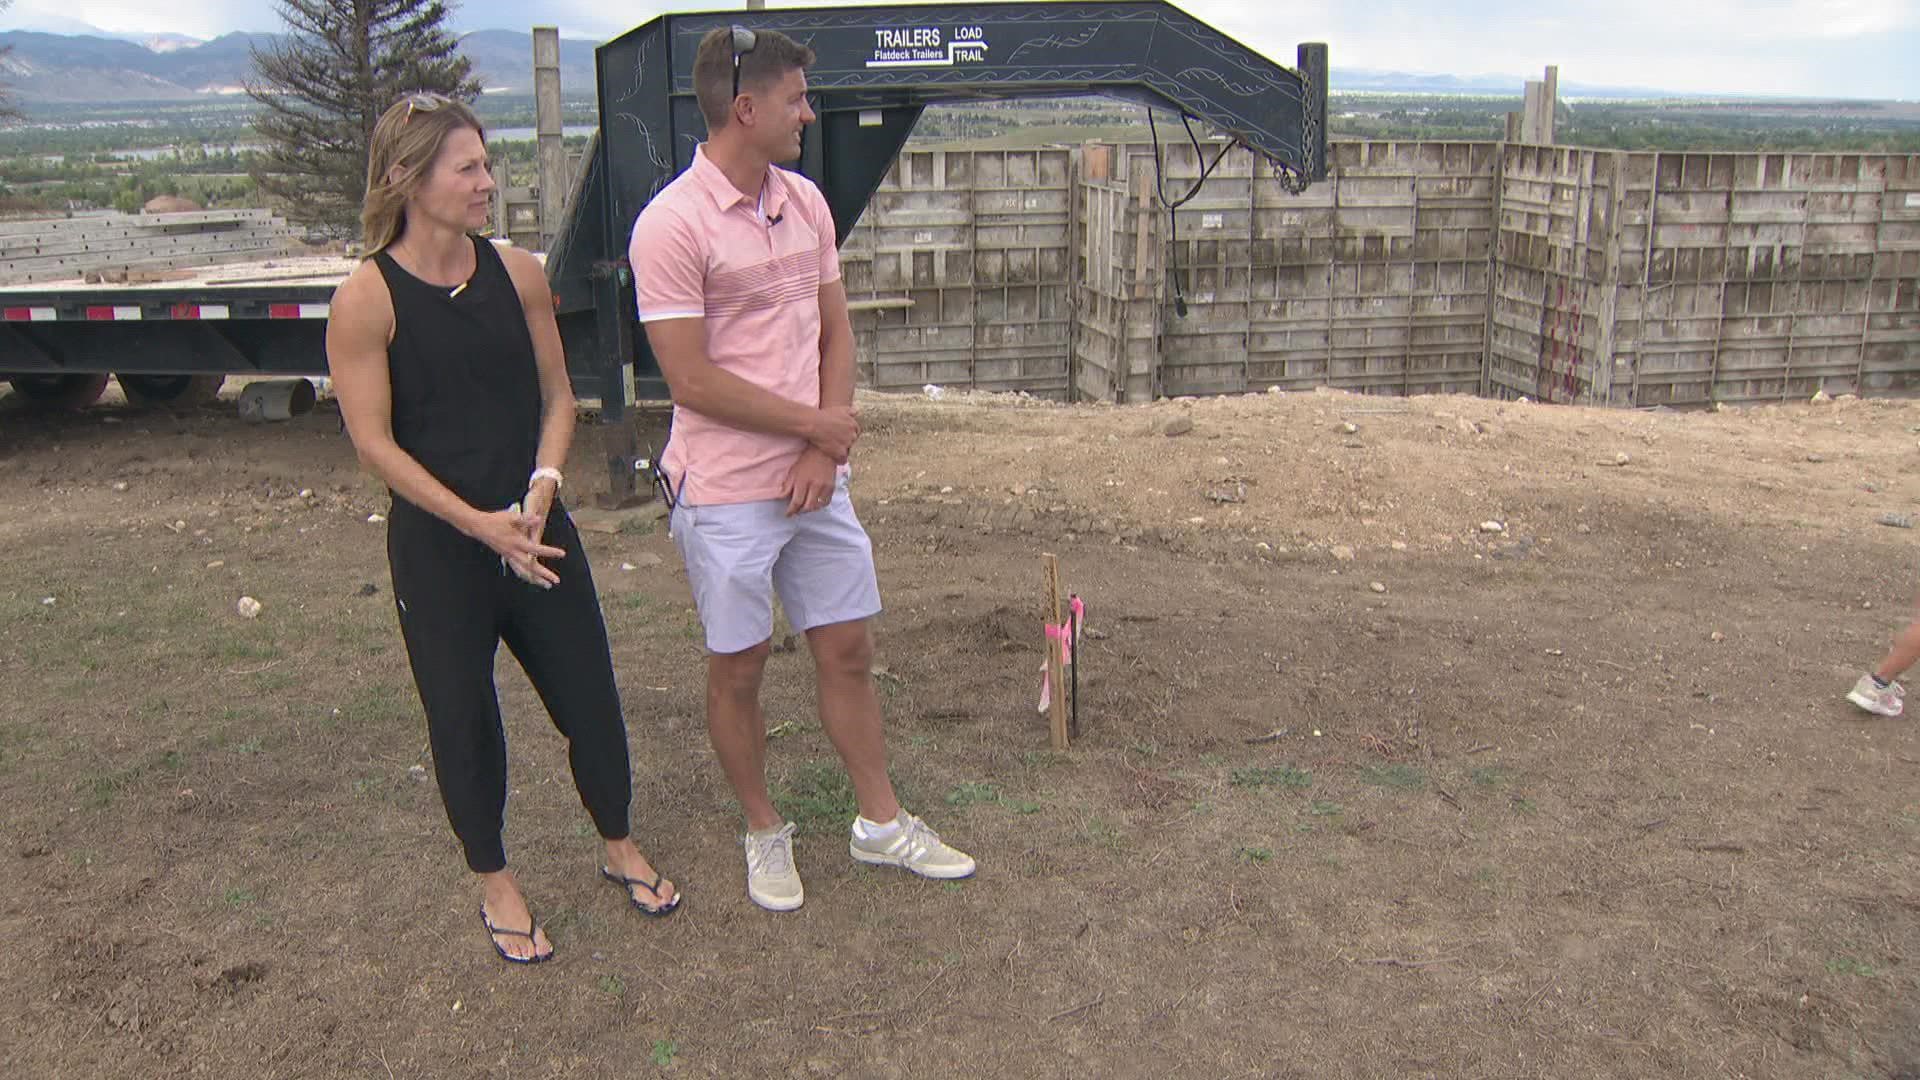 The Ferringtons moved five times since losing their home a year ago in the fire. The foundation of their new home is finally in and they hope to move in 2023.